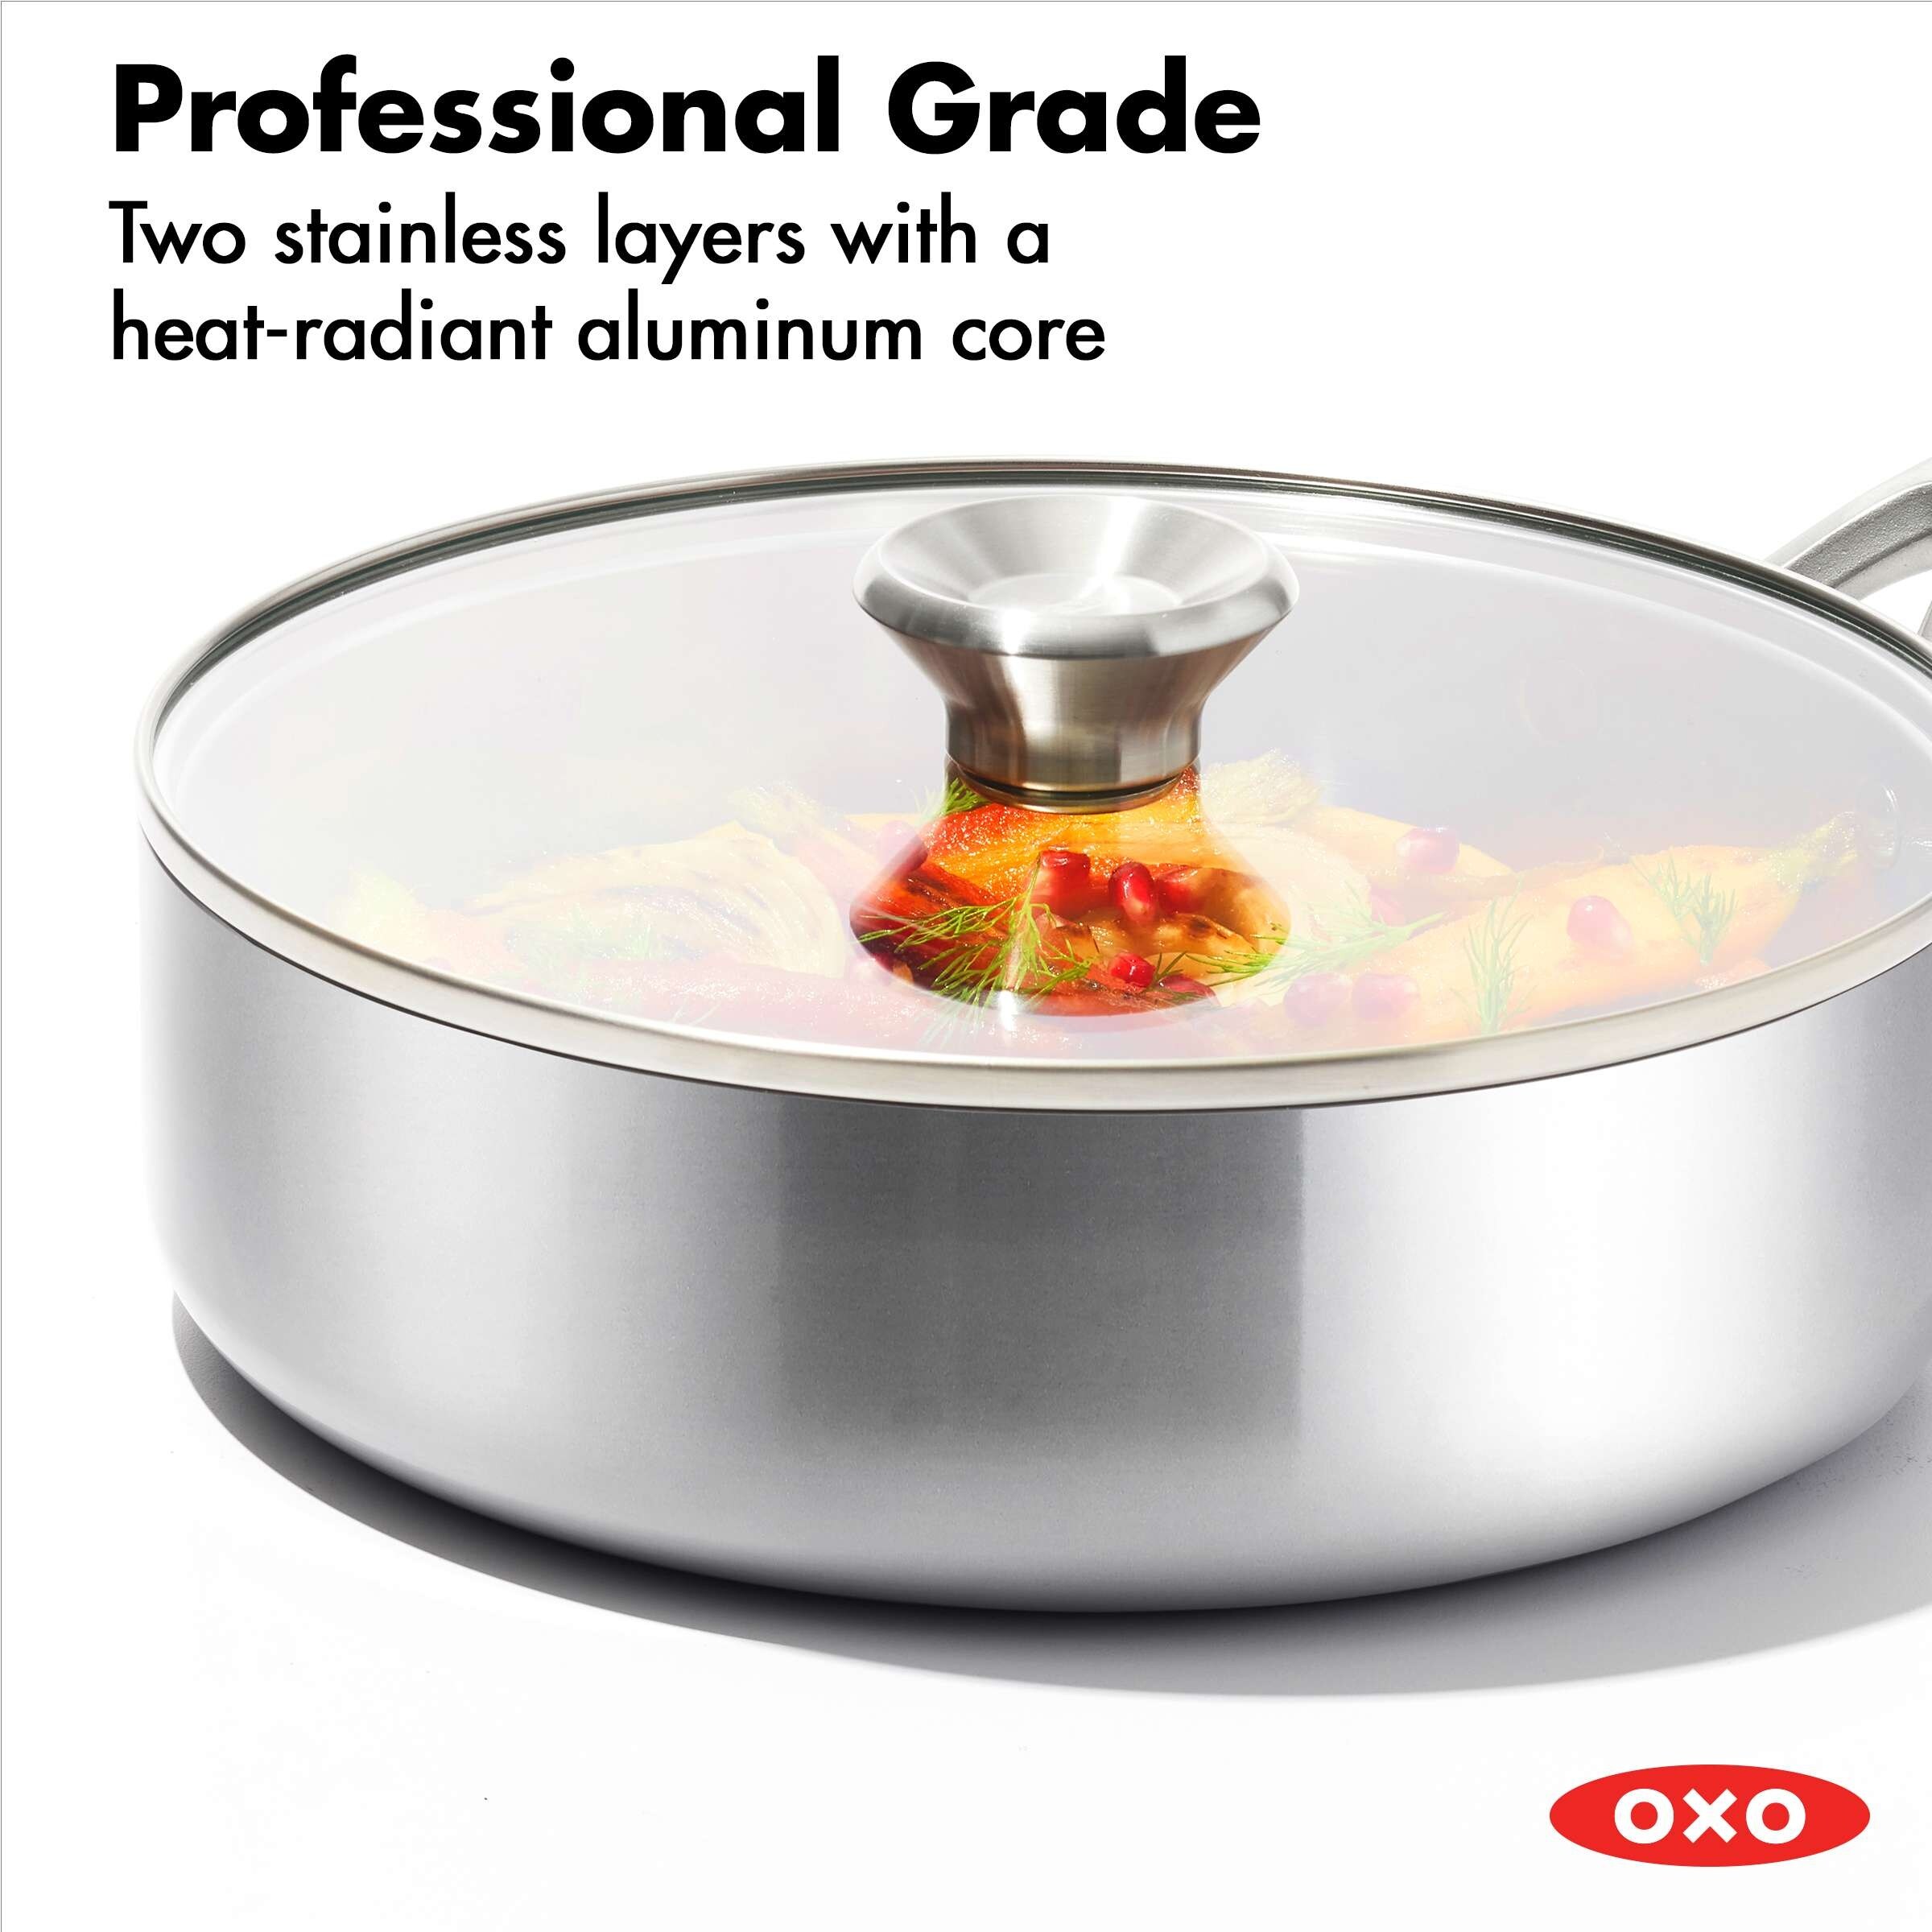 https://ak1.ostkcdn.com/images/products/is/images/direct/08d565b3ad2de44591963a2bd9e0706e2b6a95ba/OXO-Mira-3-Ply-Stainless-Steel-Saut%C3%A9-Pan-with-Lid%2C-3.25-Qt.jpg